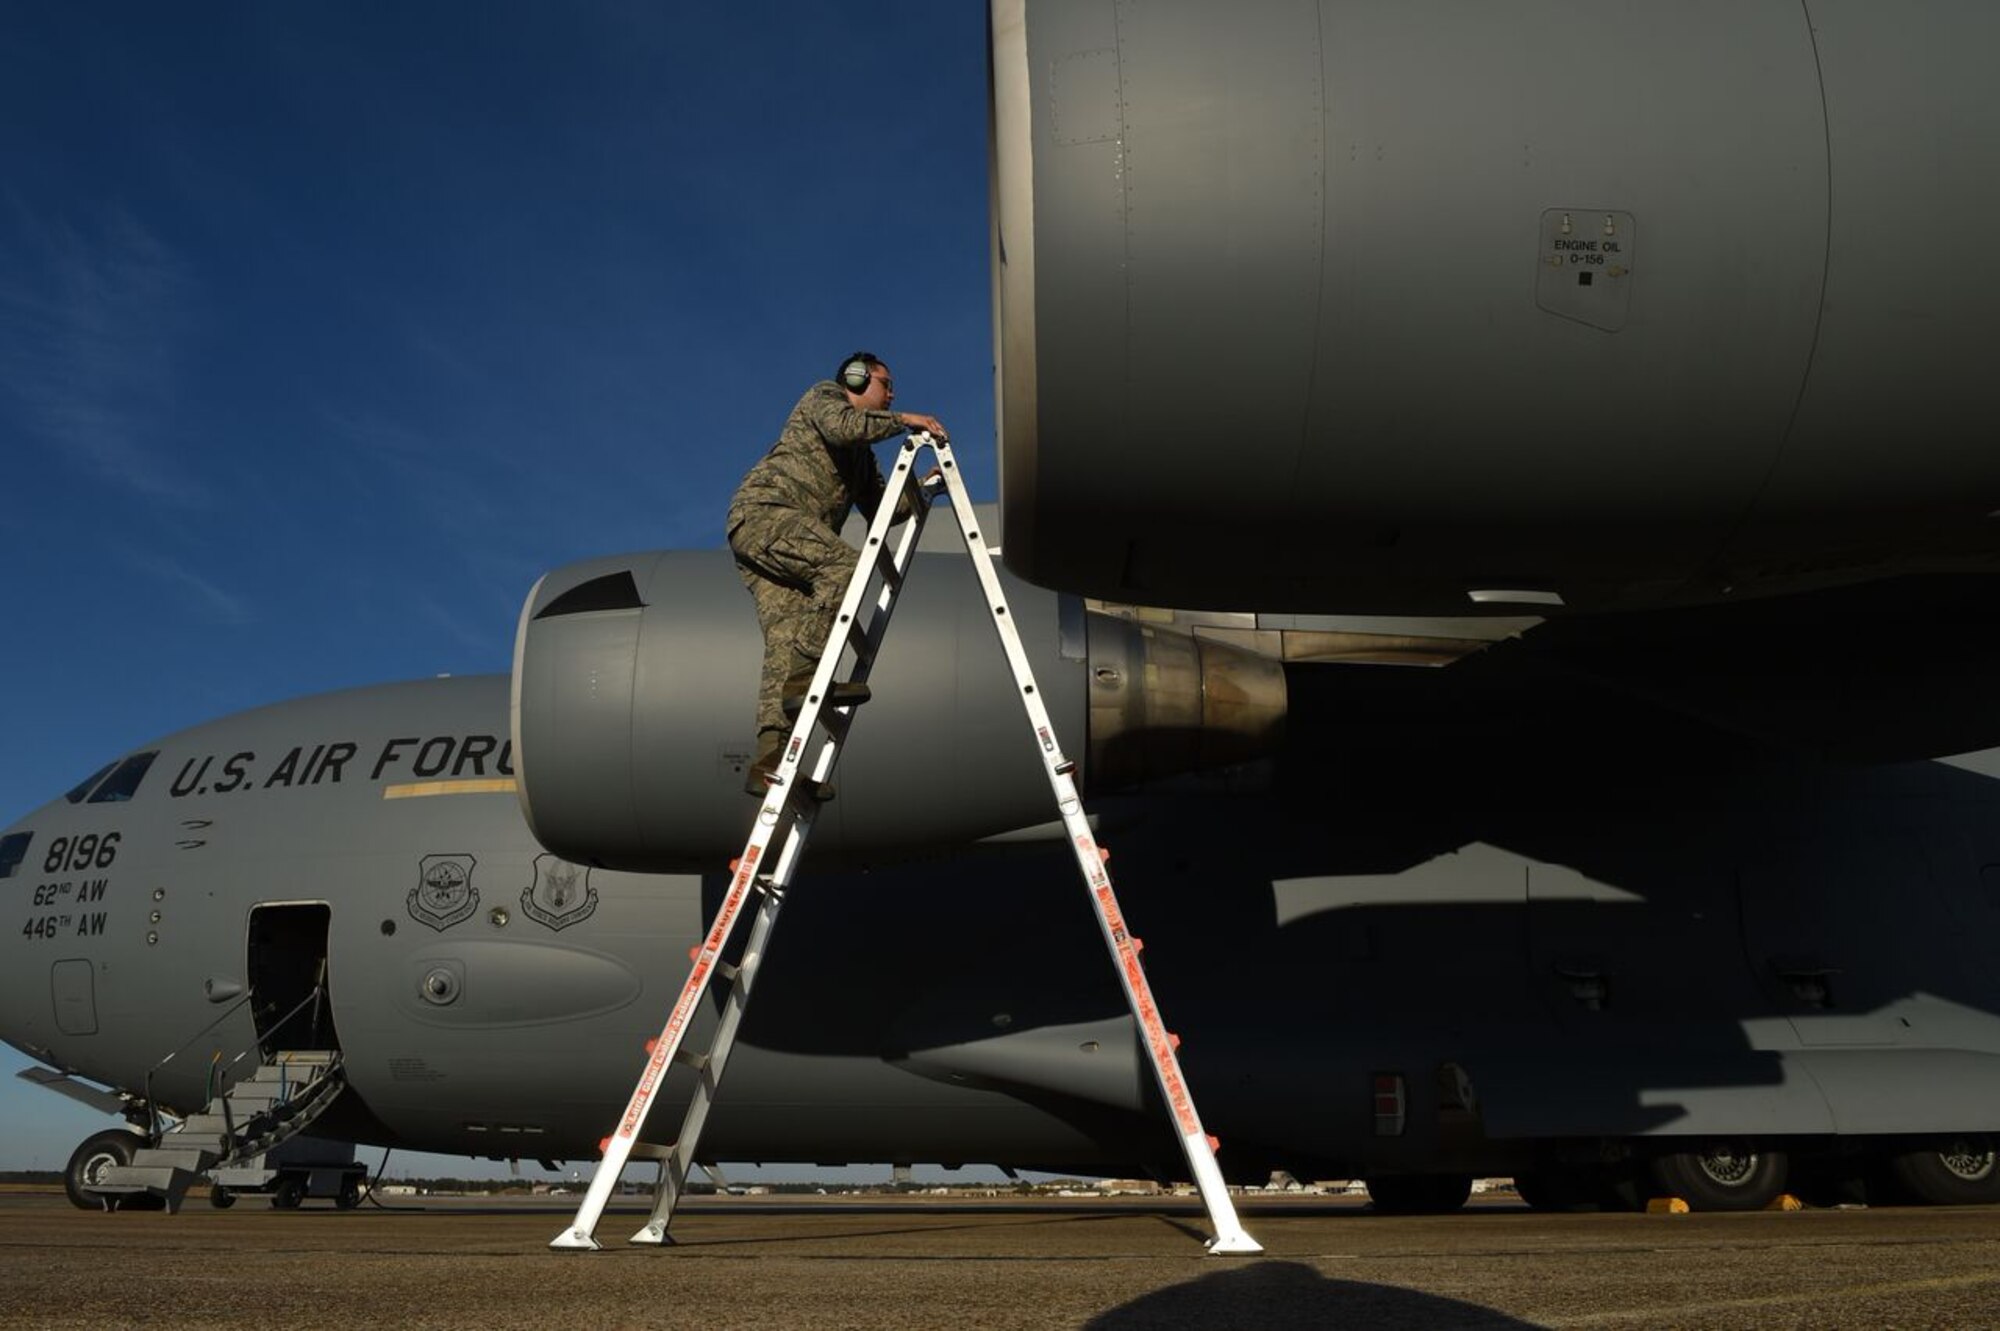 Staff Sgt. Arthur Mendoza, 62nd Aircraft Maintenance Squadron crew chief, climbs a ladder to inspect an engine during a pre-flight check on a McChord Field C-17 Globemaster III on the flight line at Eglin Air Force Base, Fla., March 2, 2016. Mendoza traveled with the C-17 aircrew from Joint Base Lewis-McChord, Wash., to participate in a flare effectiveness test. Mendoza’s job is to ensure the aircraft is operating the way it should be to ensure safety for the aircraft and crew. (U.S. Air Force photo/Staff Sgt. Naomi Shipley)